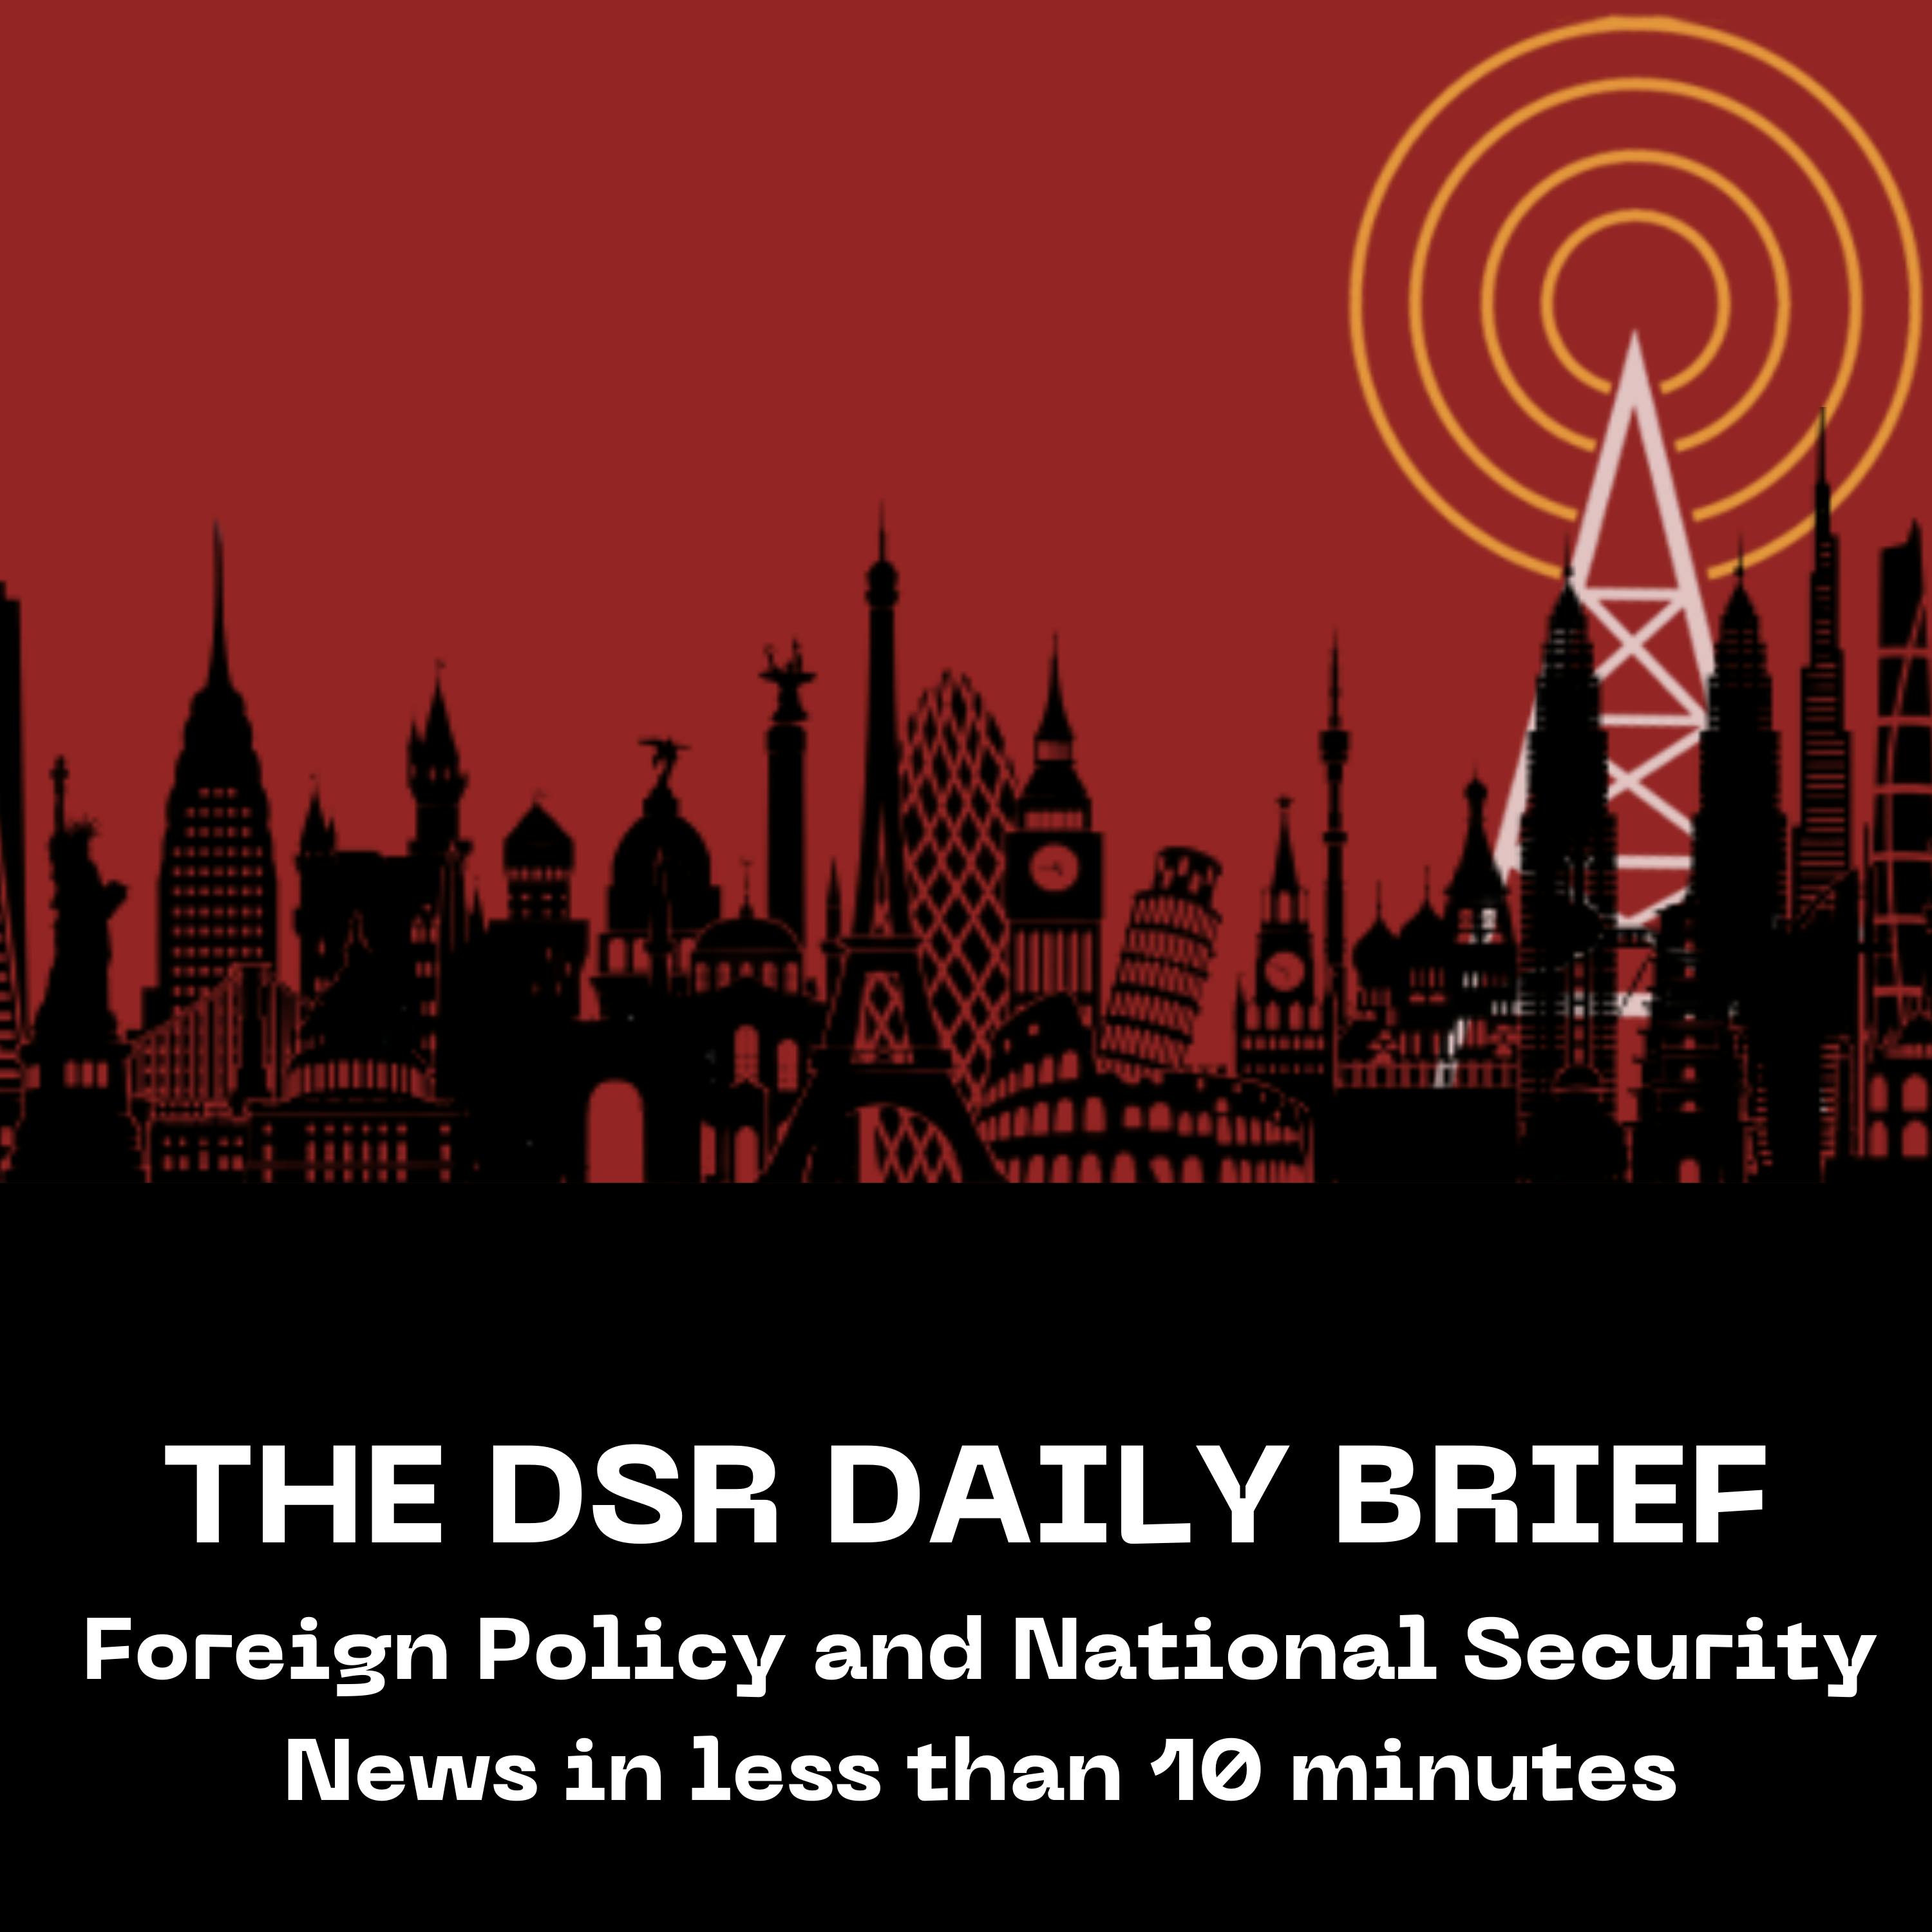 The DSR Daily for April 10: January 6th Rioters Win Early Release, Parents of Michigan Gunman Sentenced